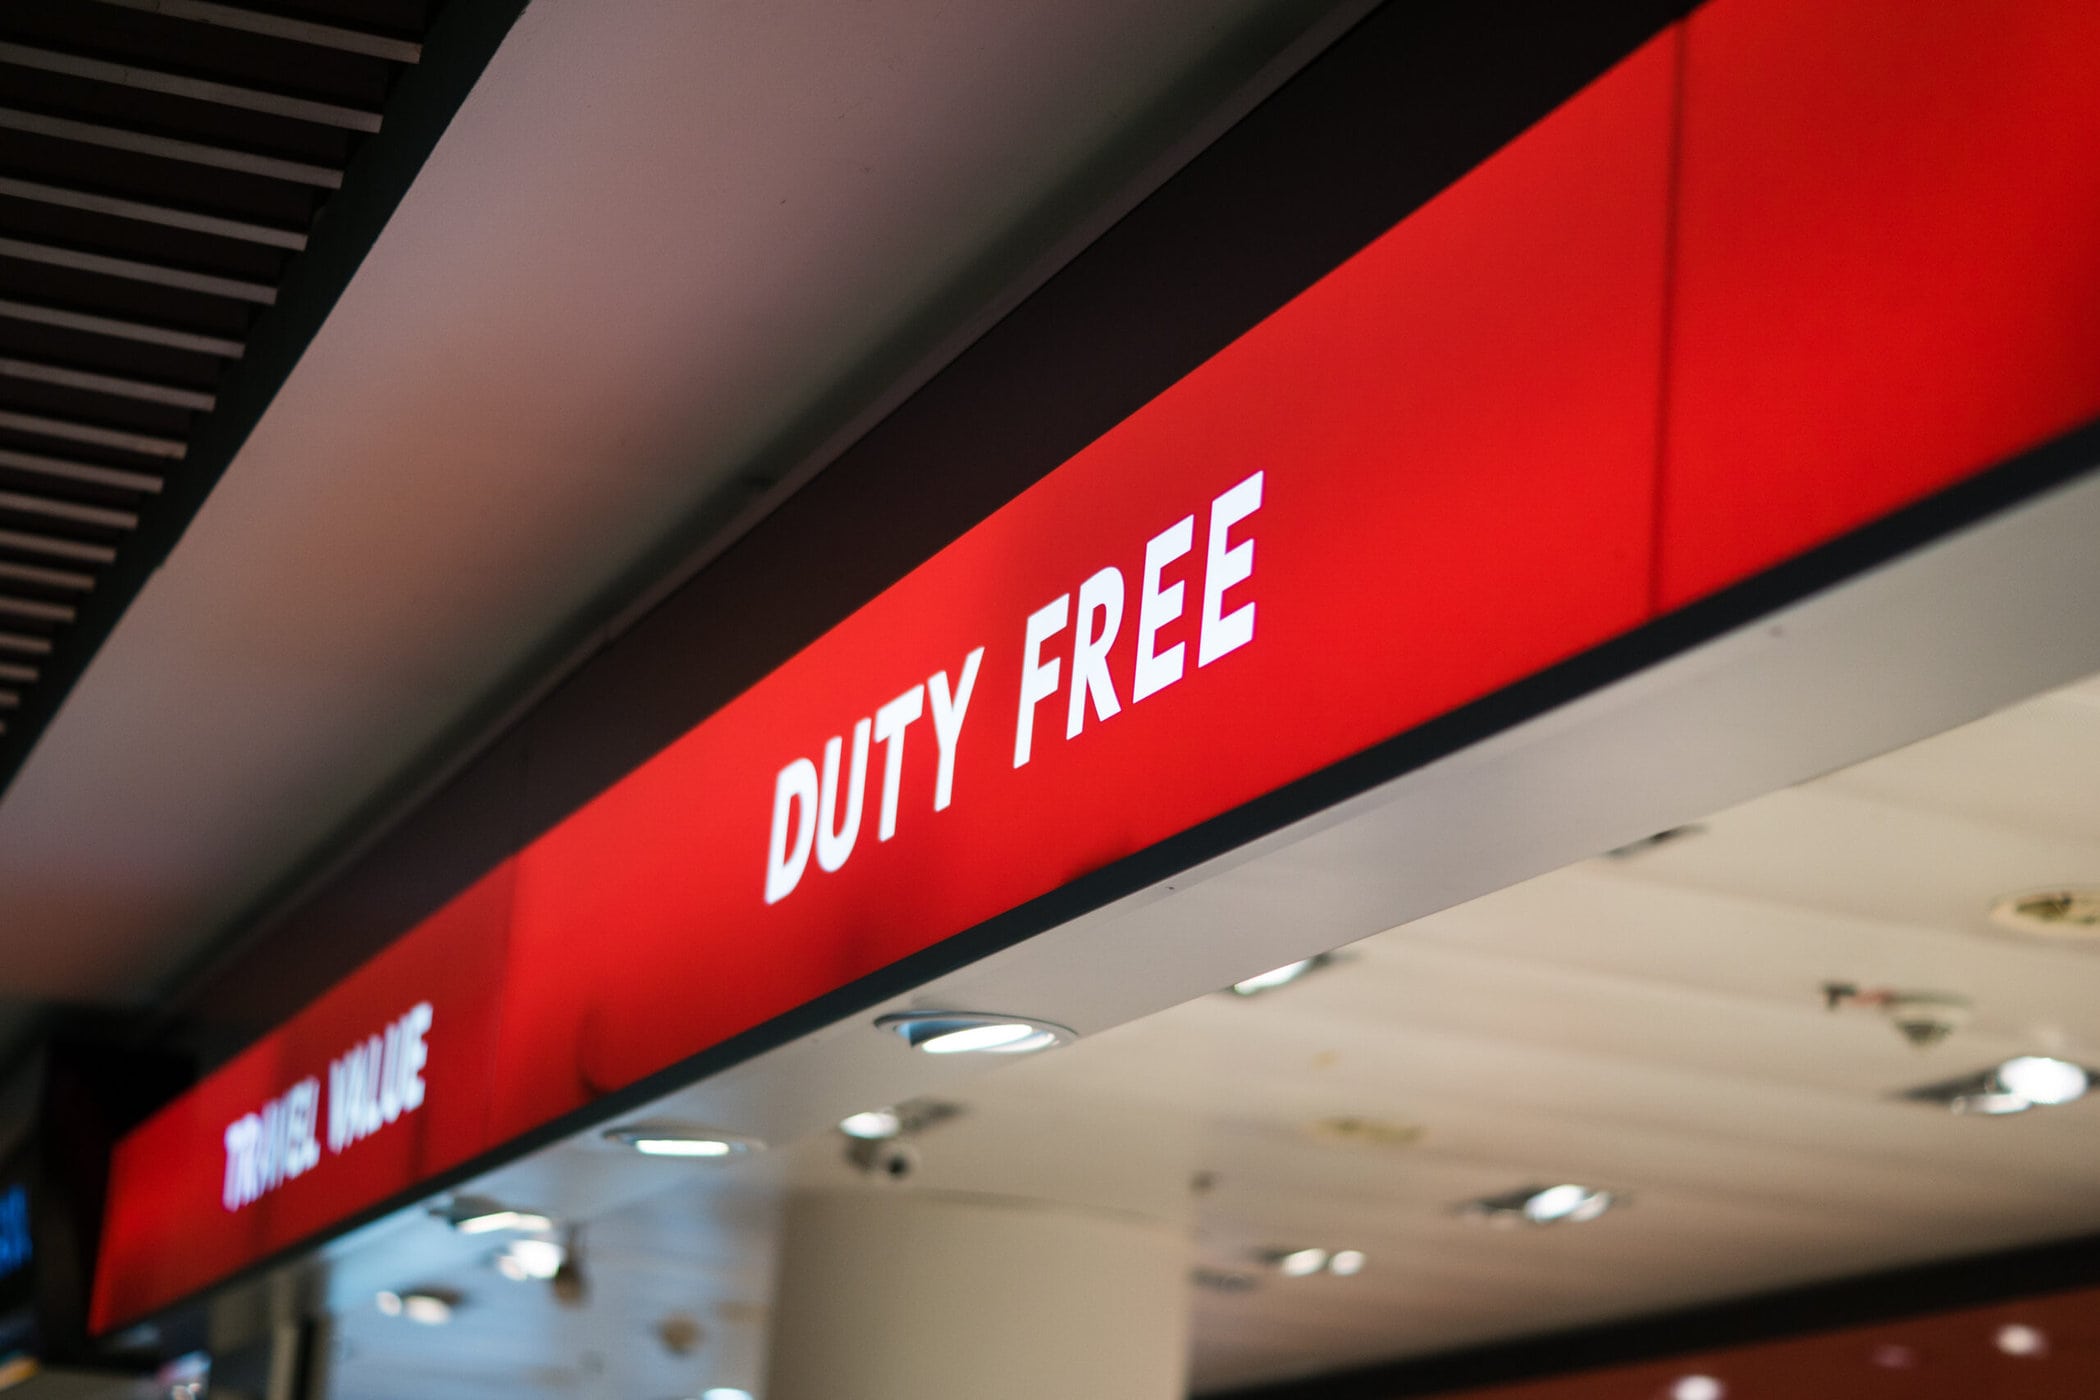 Major Duty Free Retailer Sees 10% increase in sales online and in store